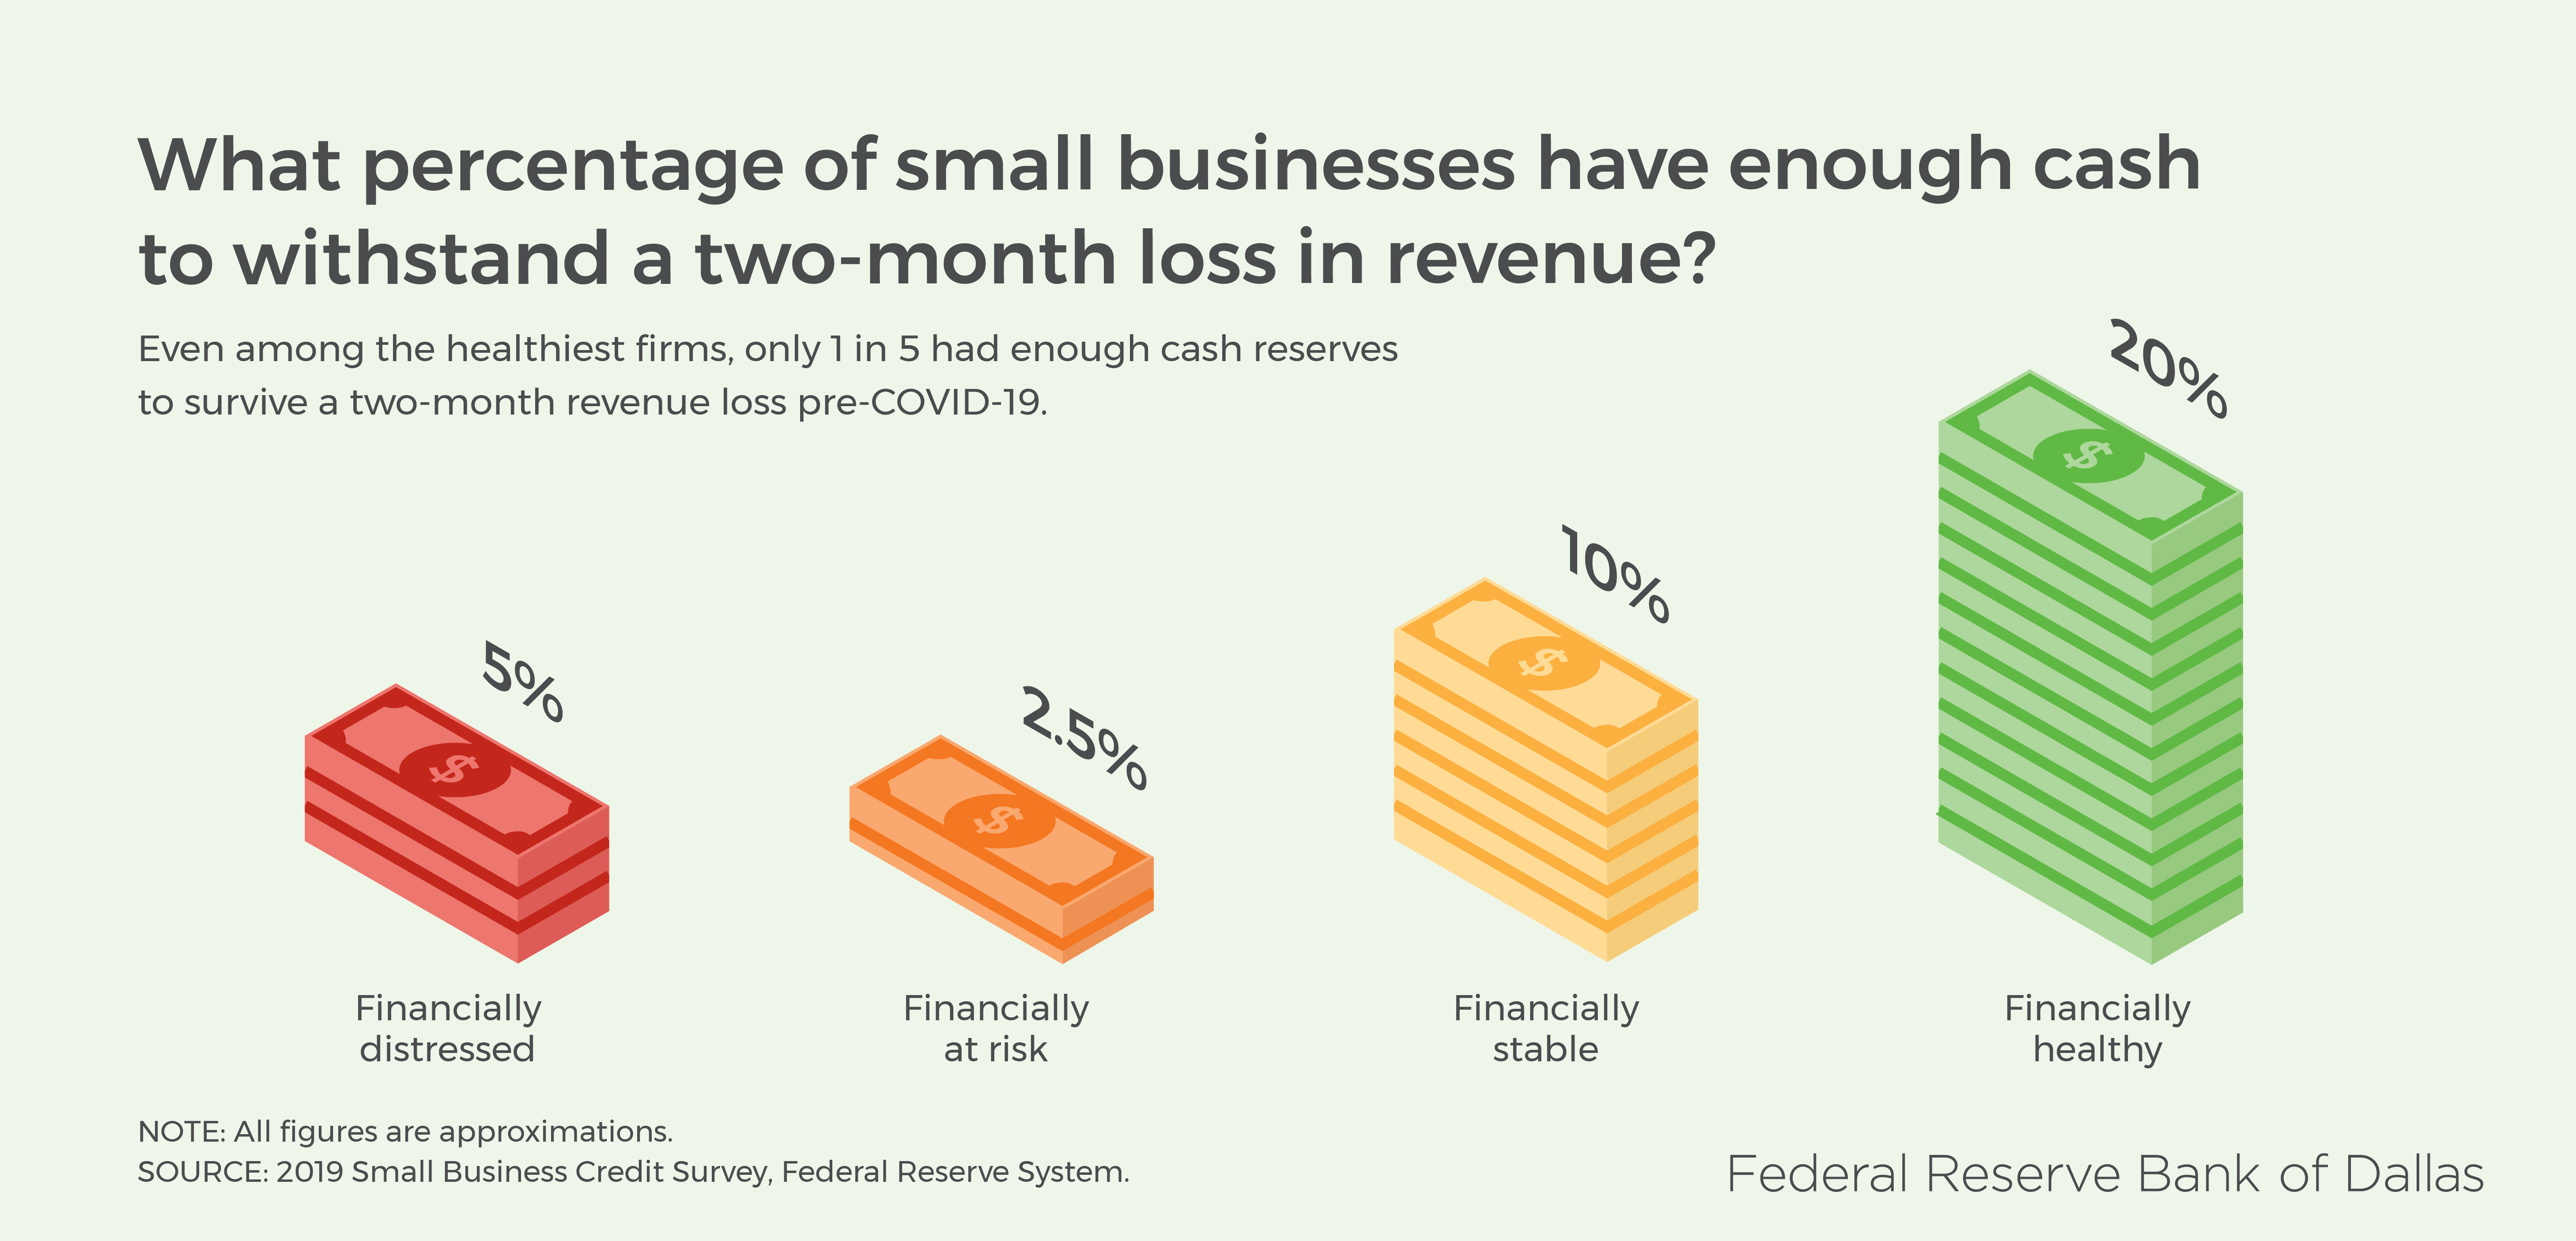 Graphic: What percentage of small businesses have enough cash to withstand a two-month loss in revenue?